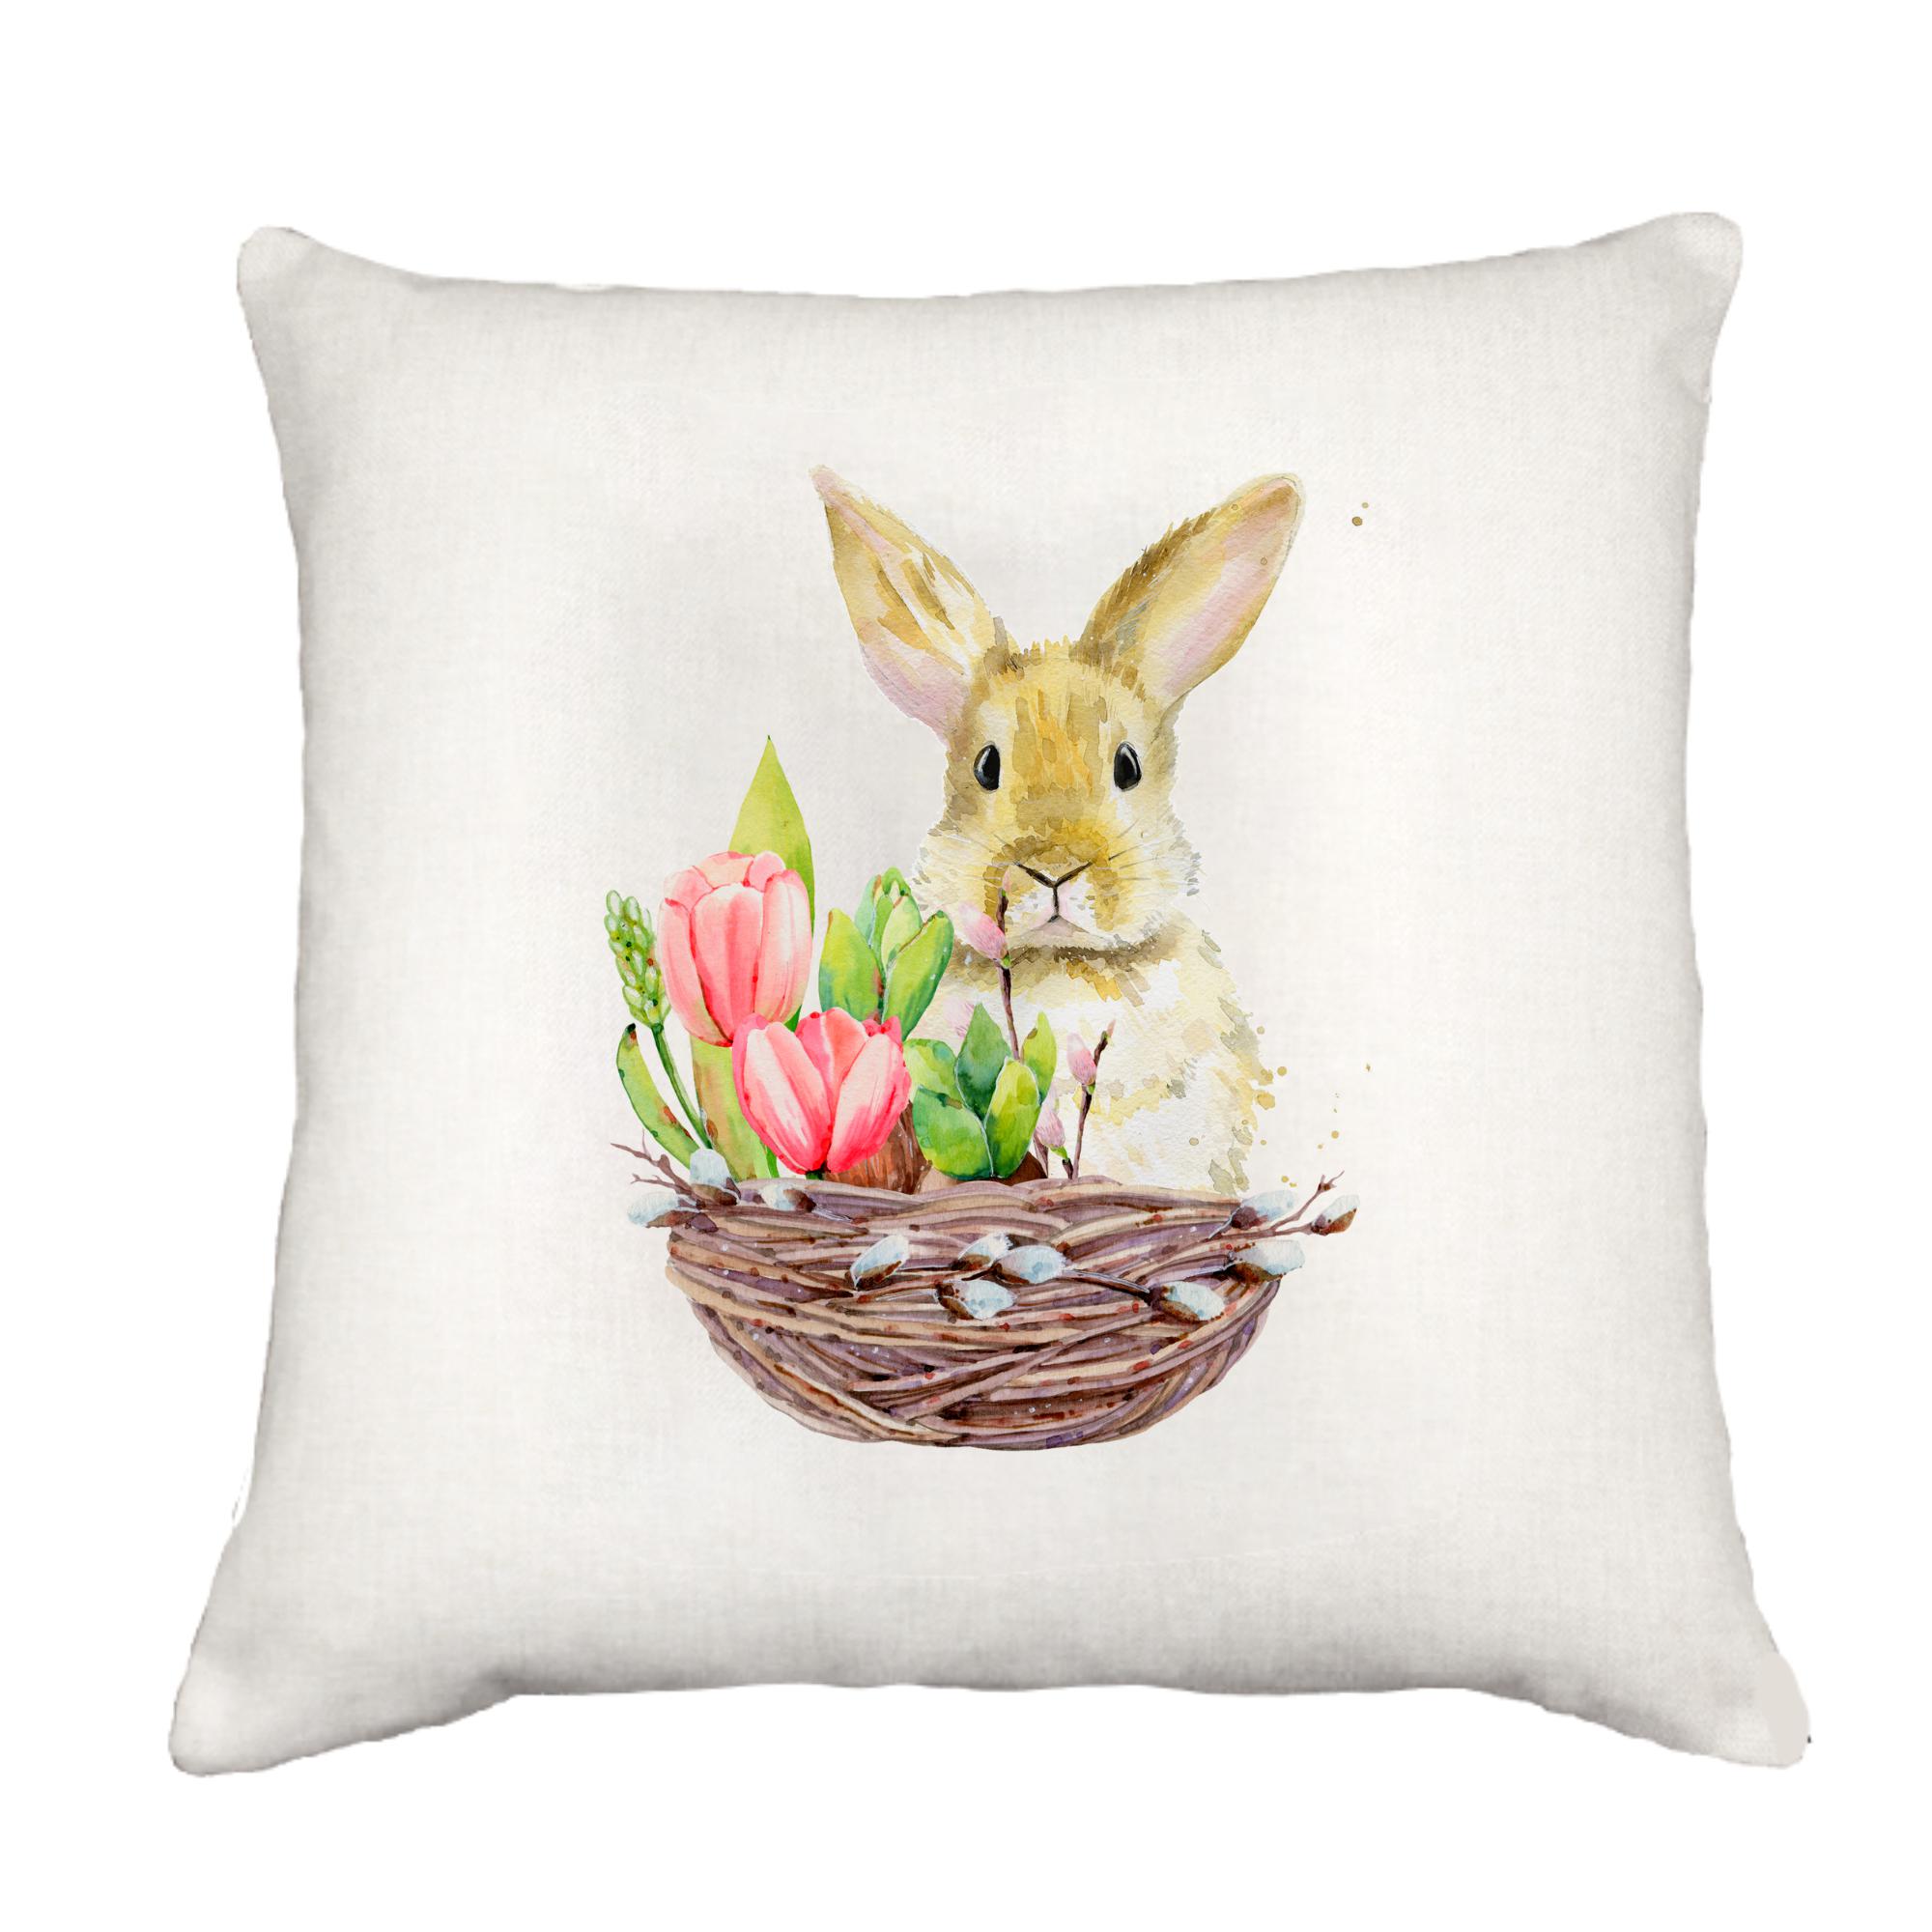 Bunny in Basket Cottage Pillow Throw/Decorative Pillow - Southern Sisters